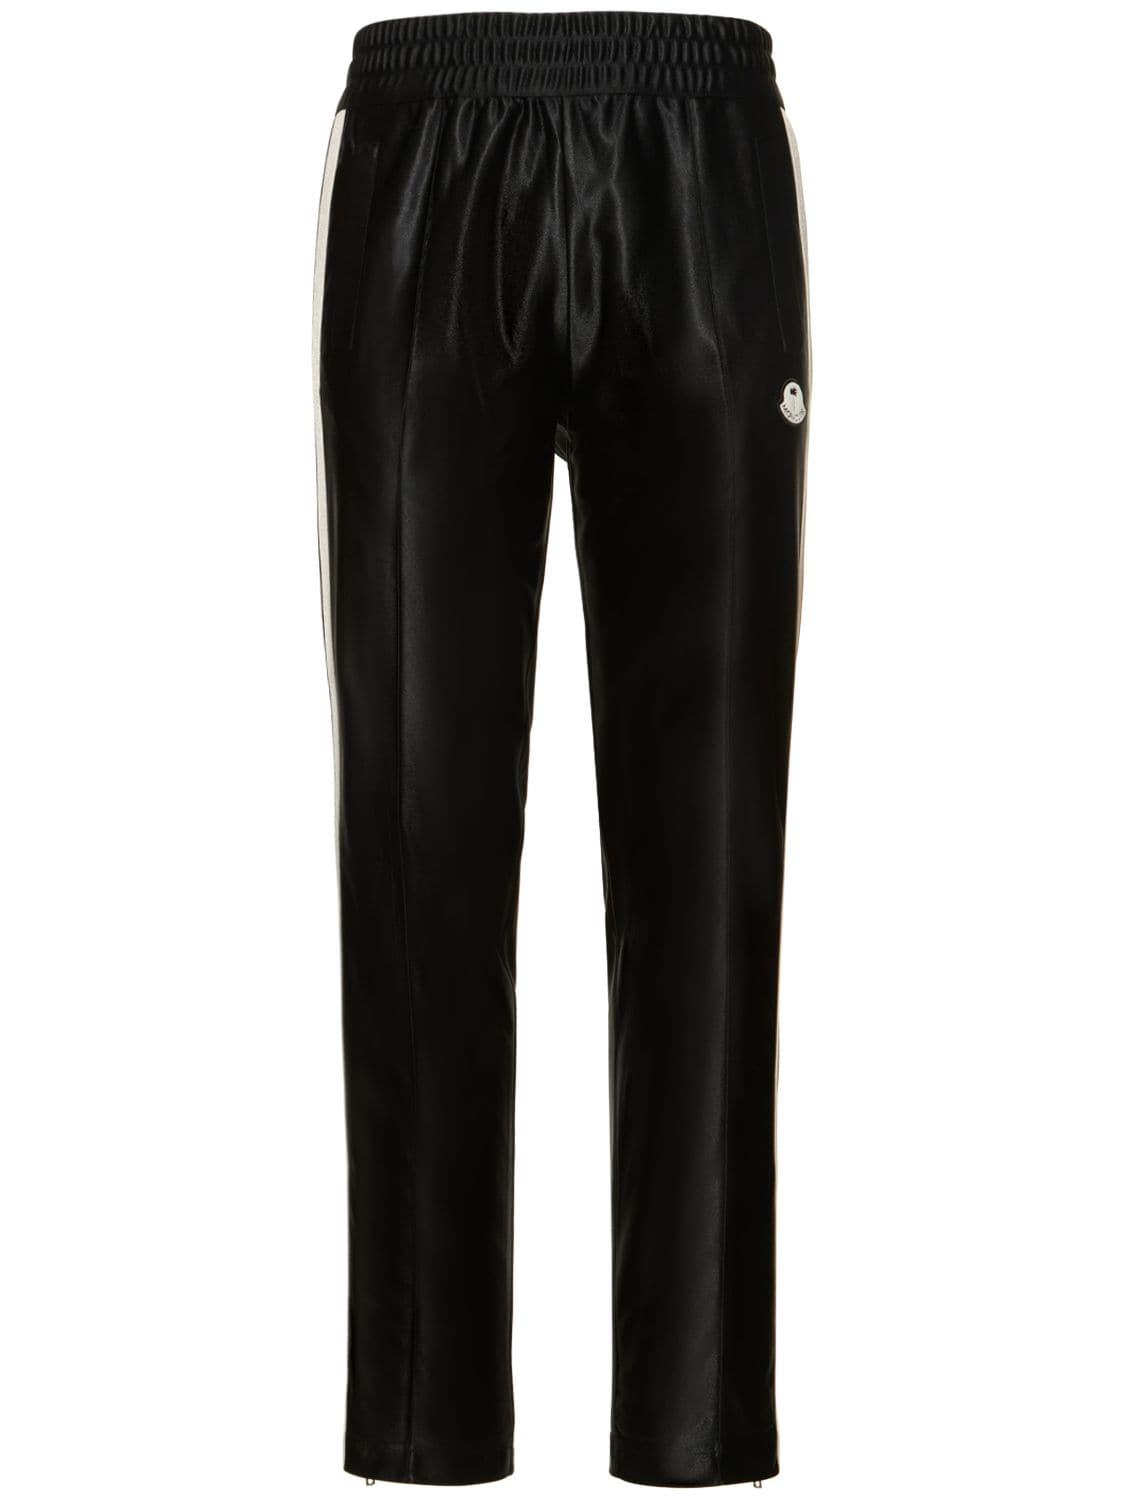 MONCLER GENIUS Glossy Jersey Track Pants